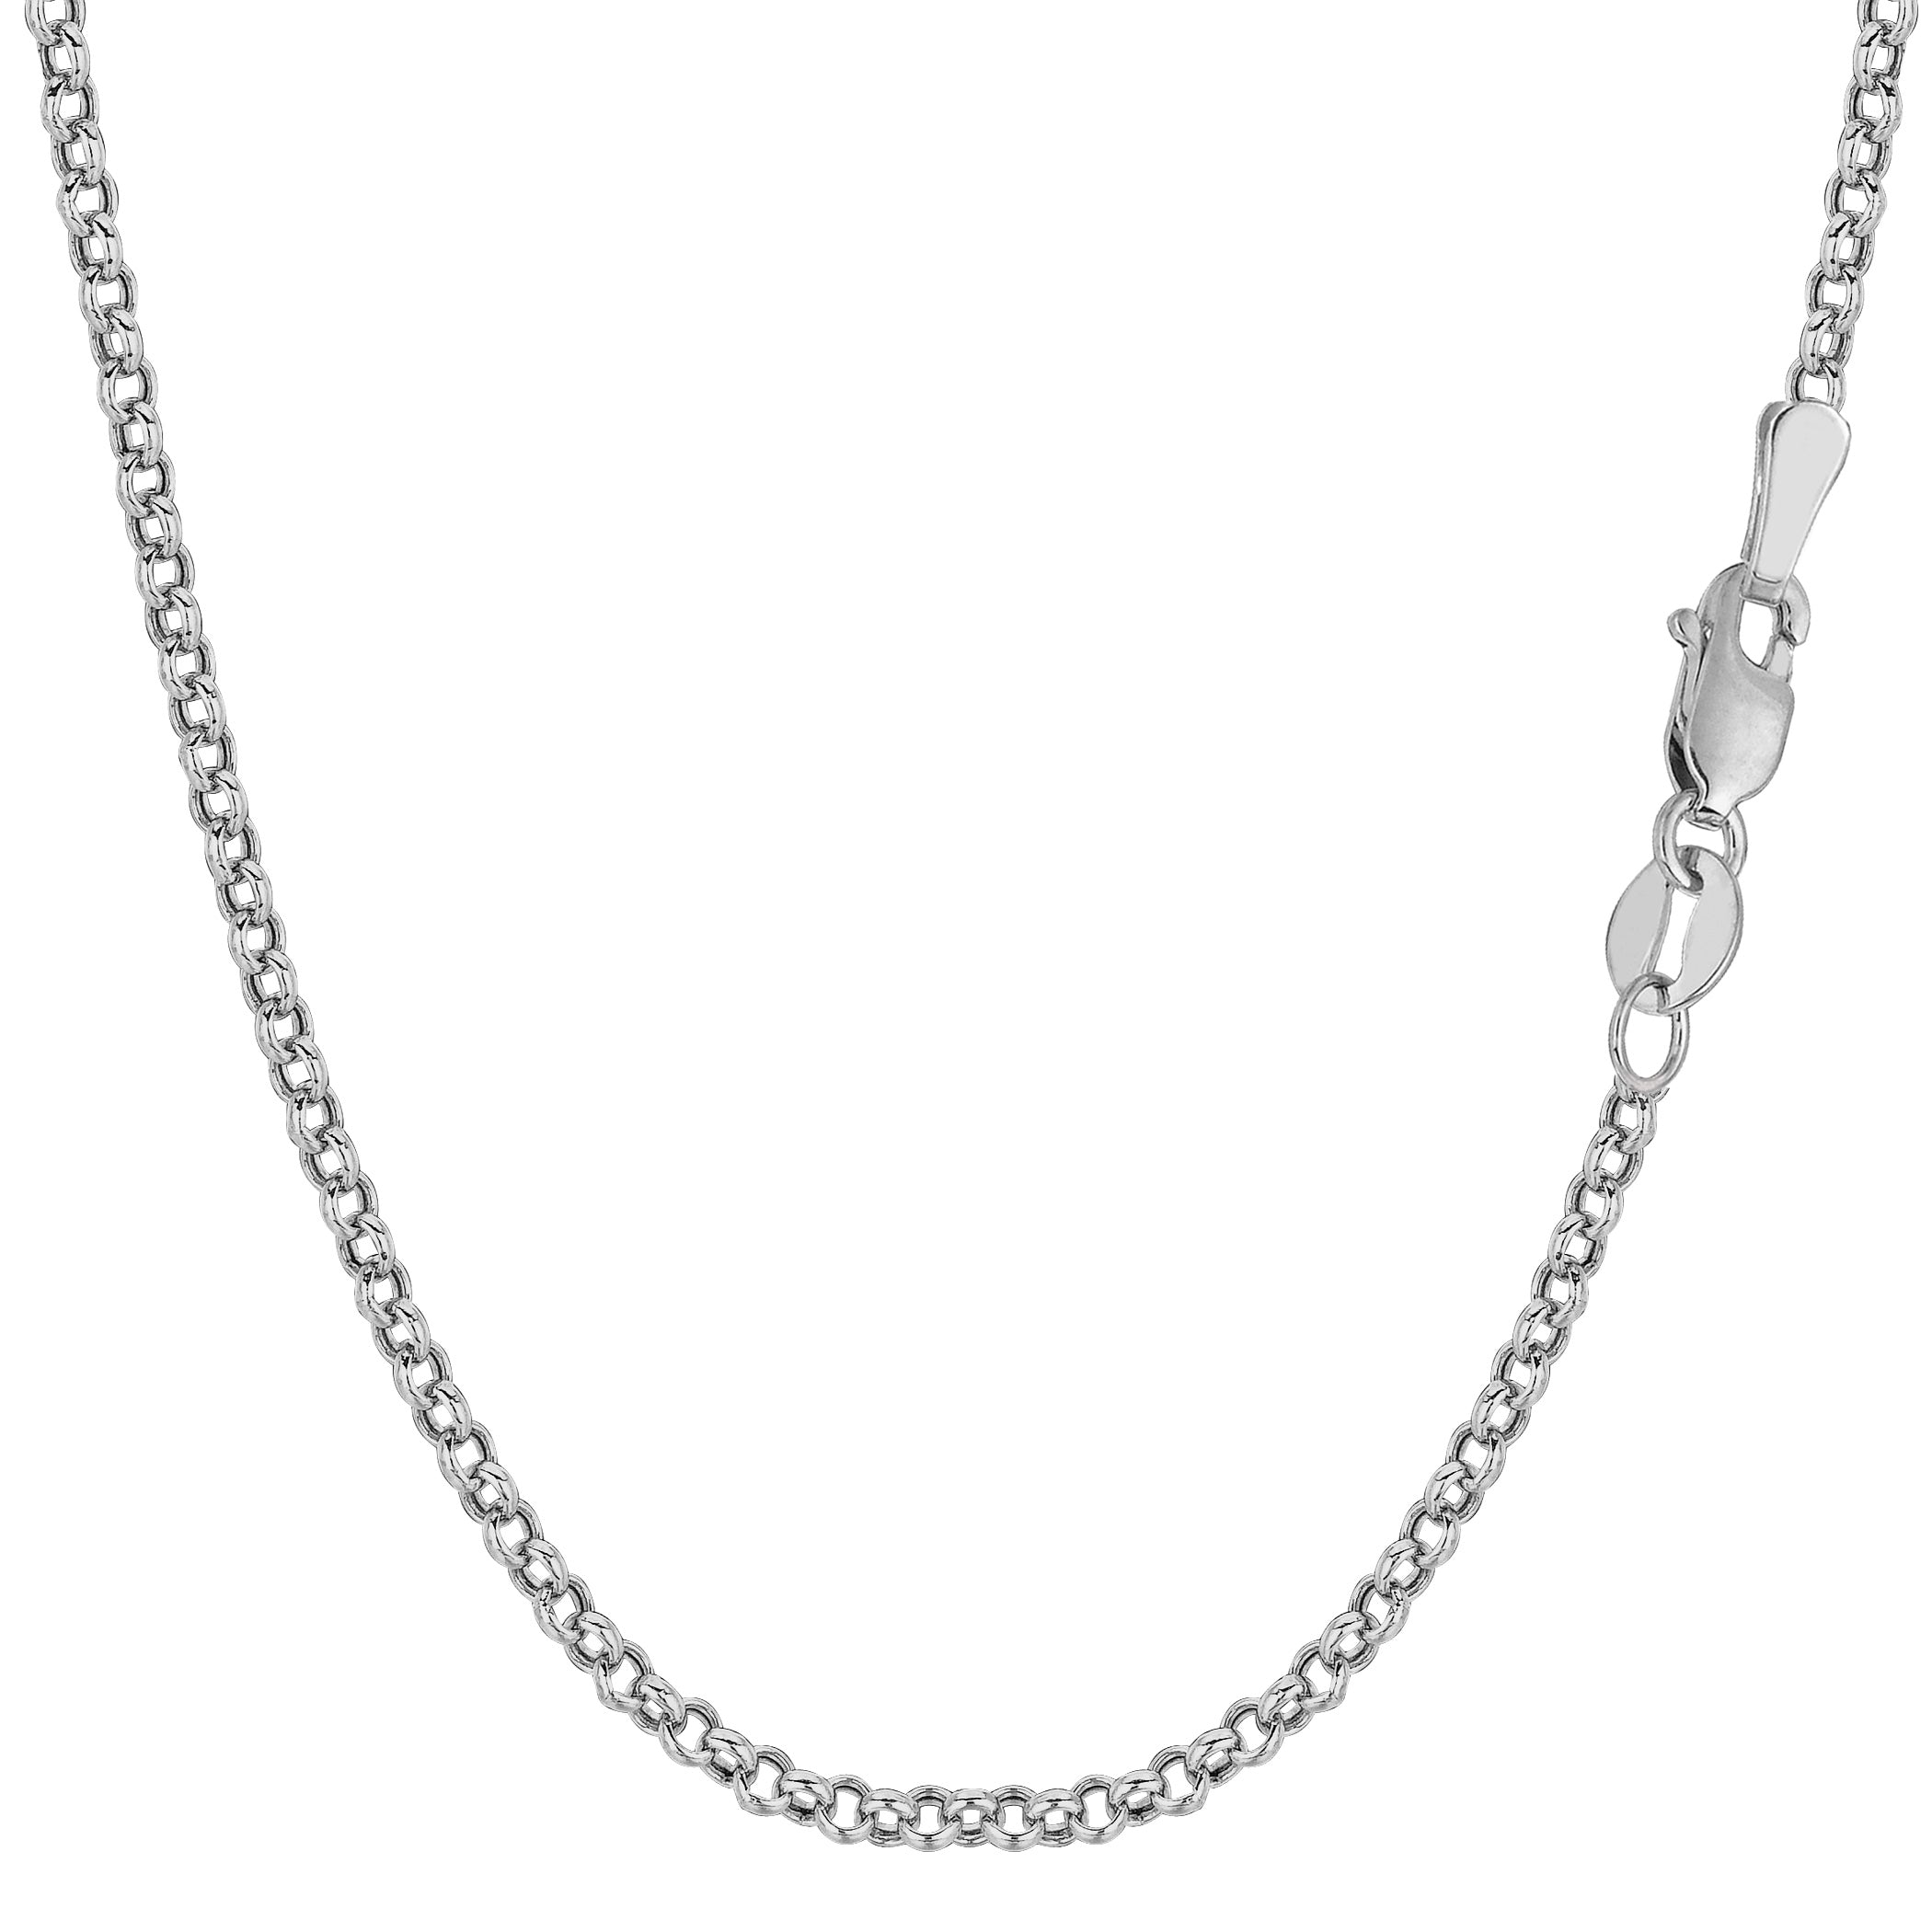 10k White Gold Round Rolo Link Chain Necklace, 2.3mm